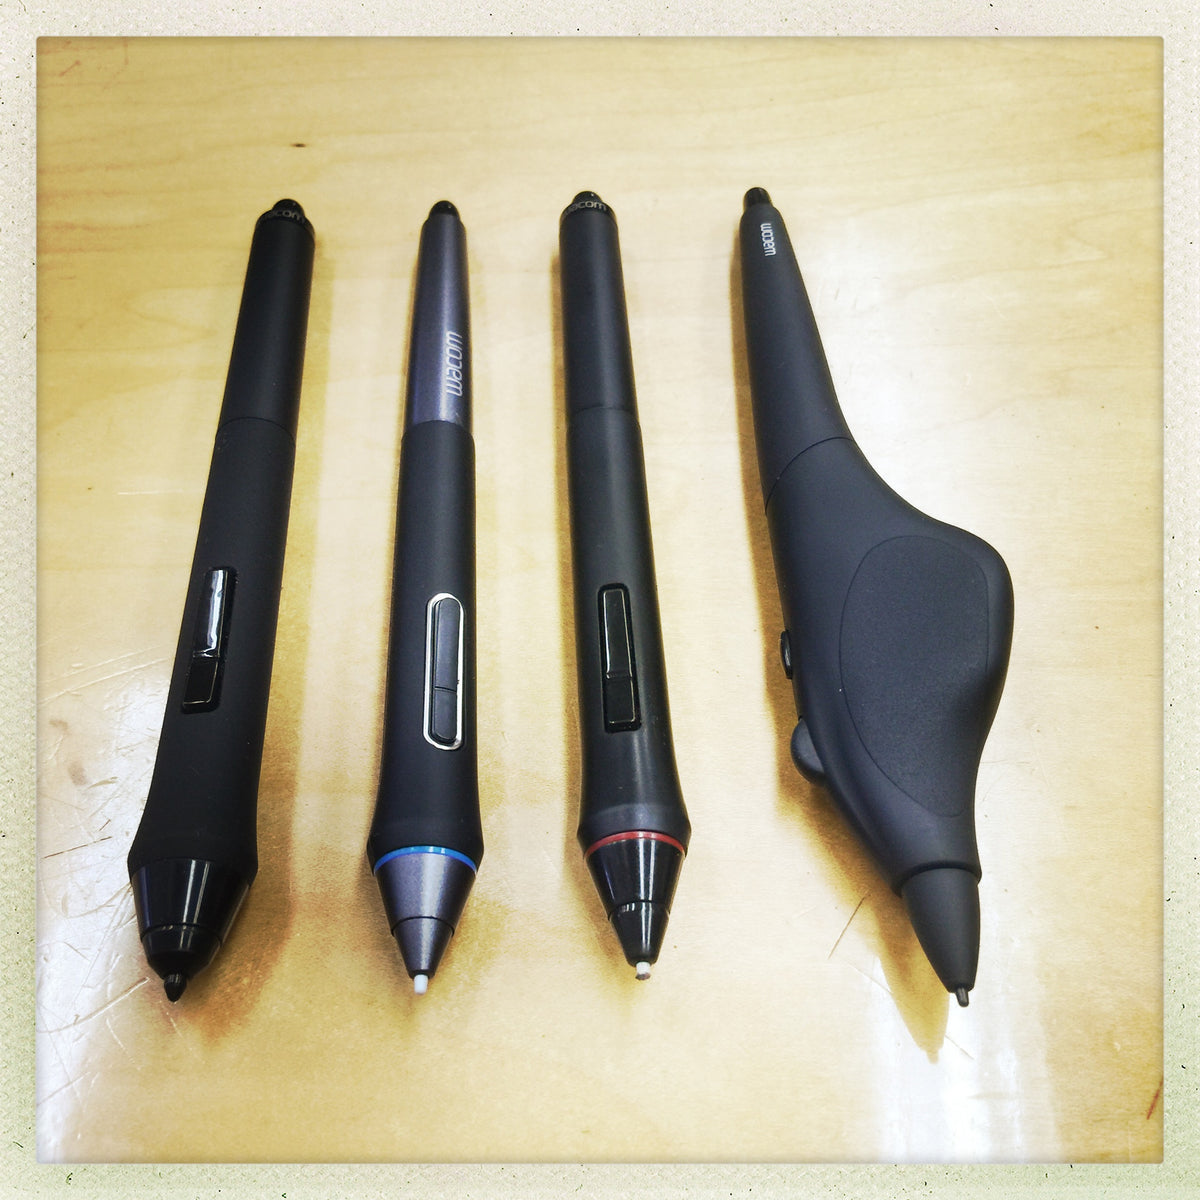 Wacom Pens.. What's the difference? – MacHollywood